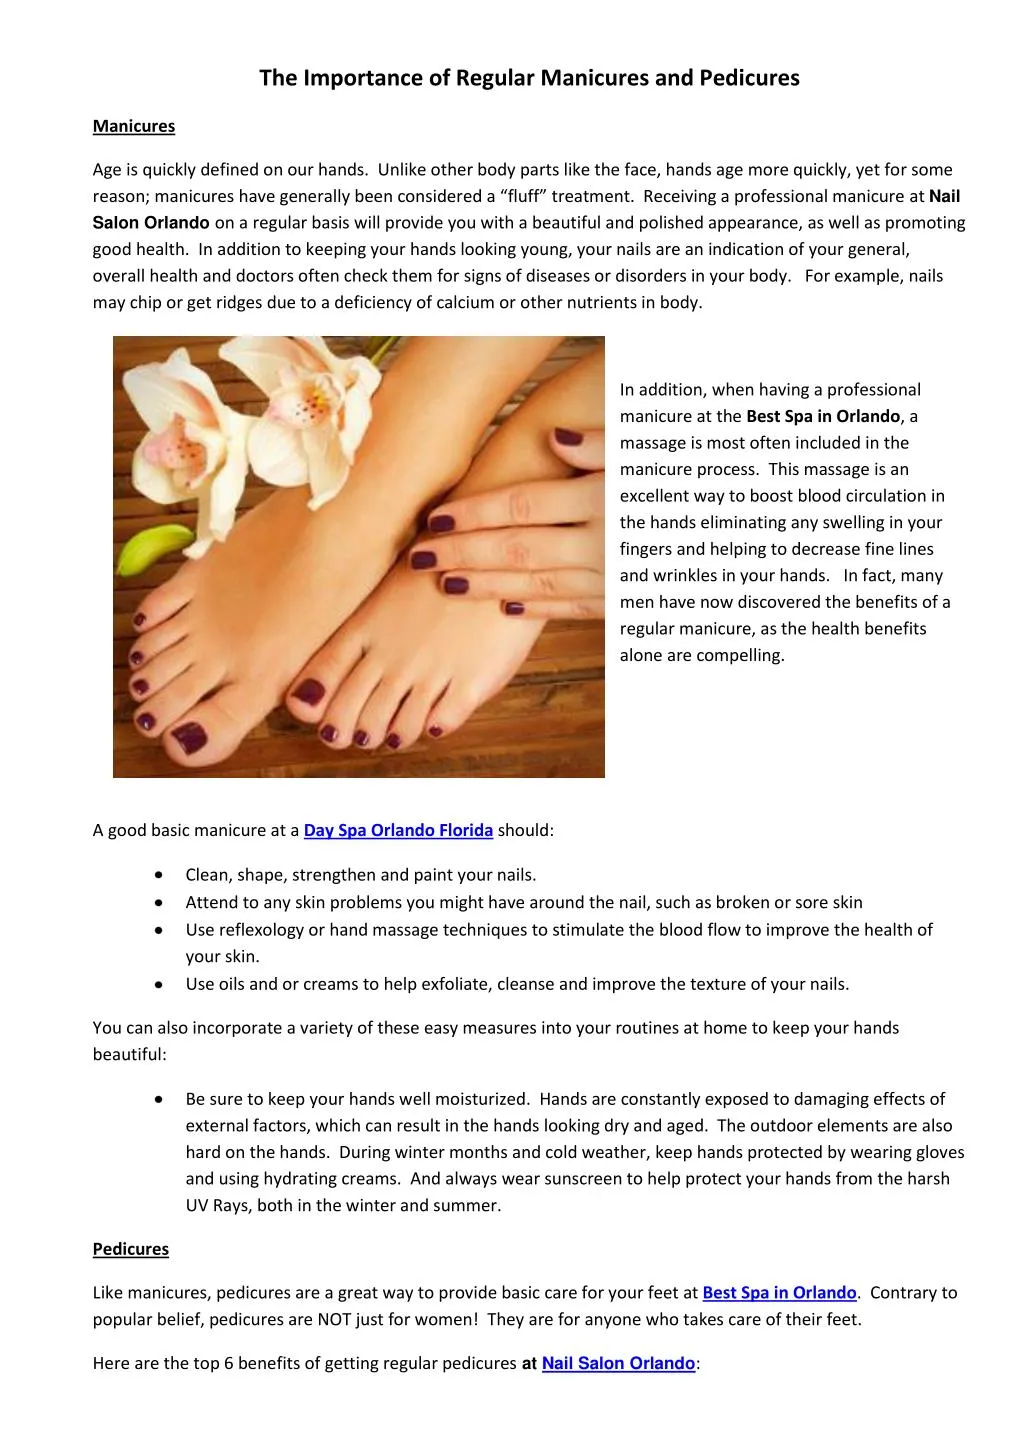 Ppt The Importance Of Regular Manicures And Pedicures Powerpoint Presentation Id7326932 